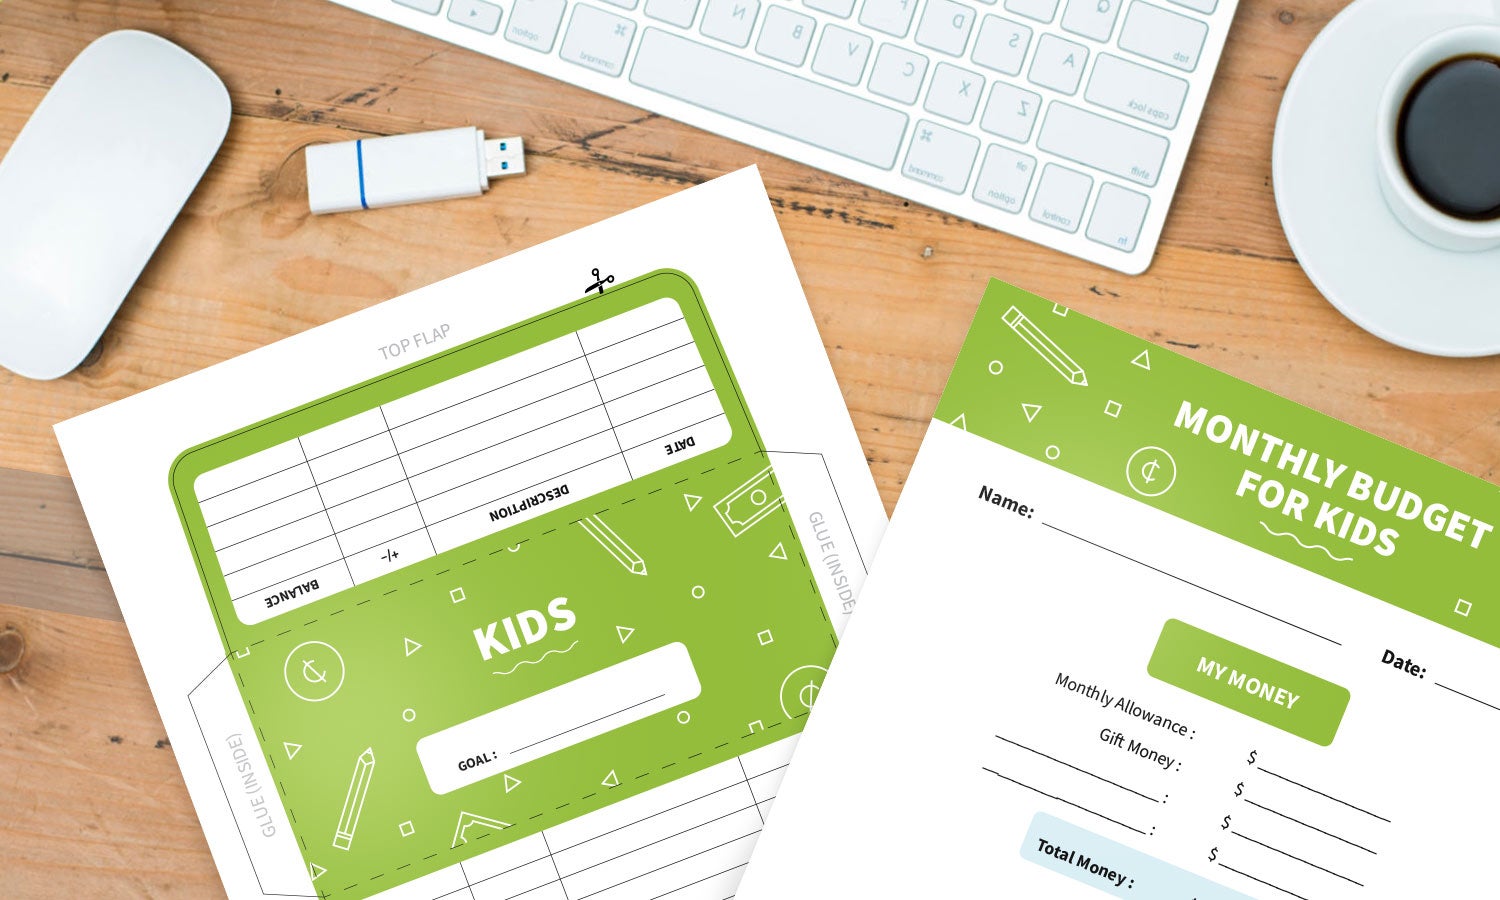 Kids-themed budget template and cash envelope printable laid out on a table